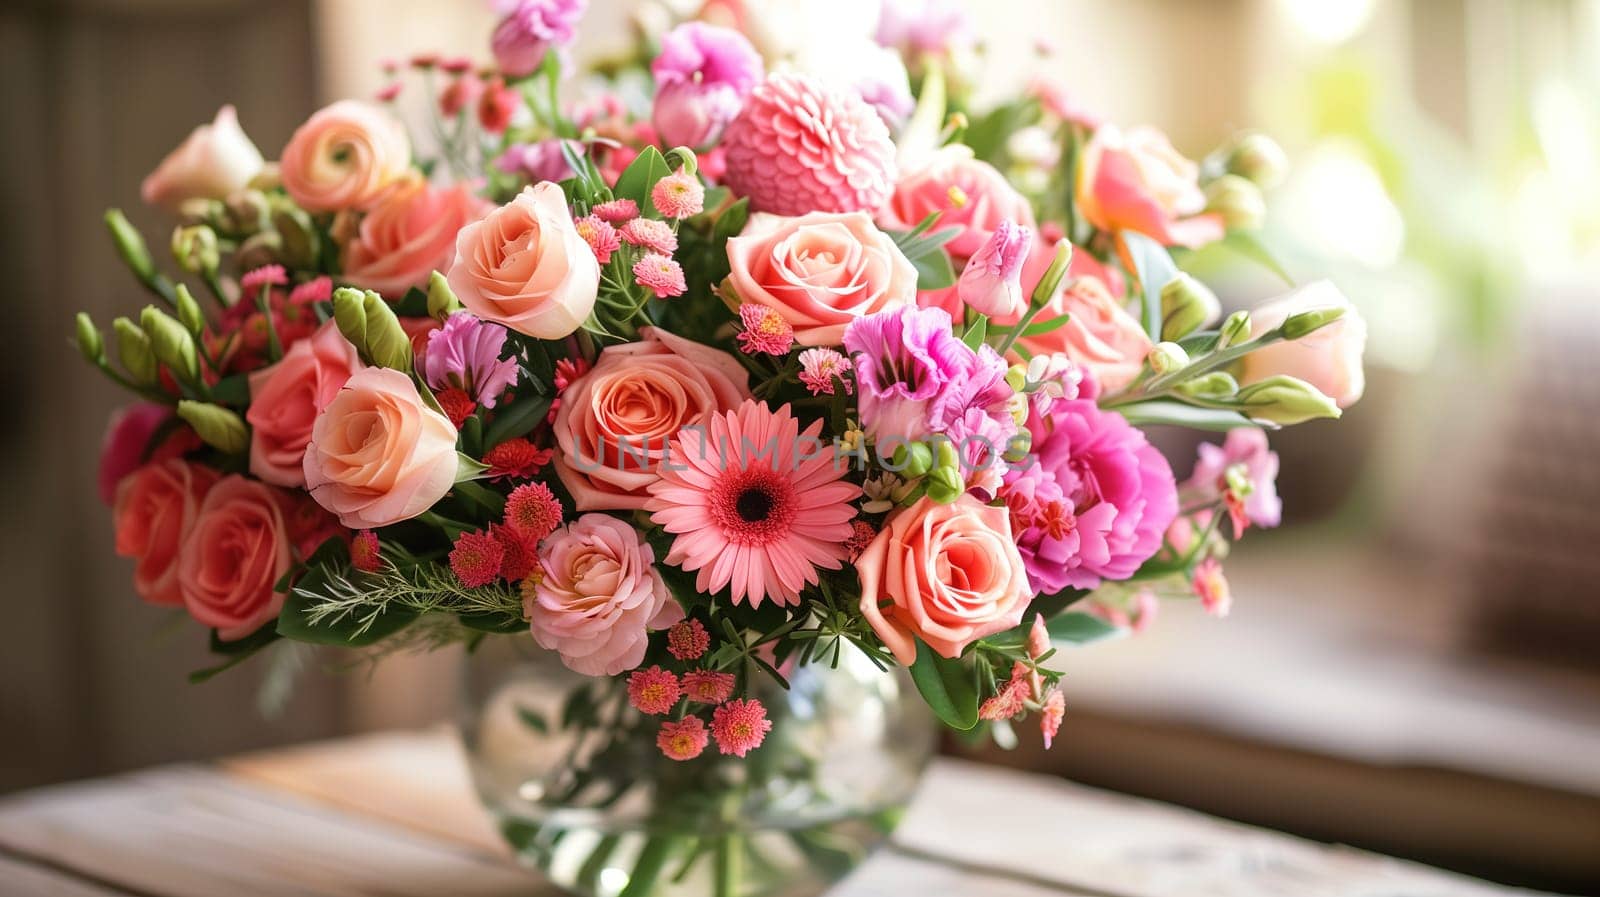 A vase overflowing with a vibrant mix of pink and orange flowers, creating a bright and colorful display. The vase is placed on a table, showcasing the beauty of the flowers.